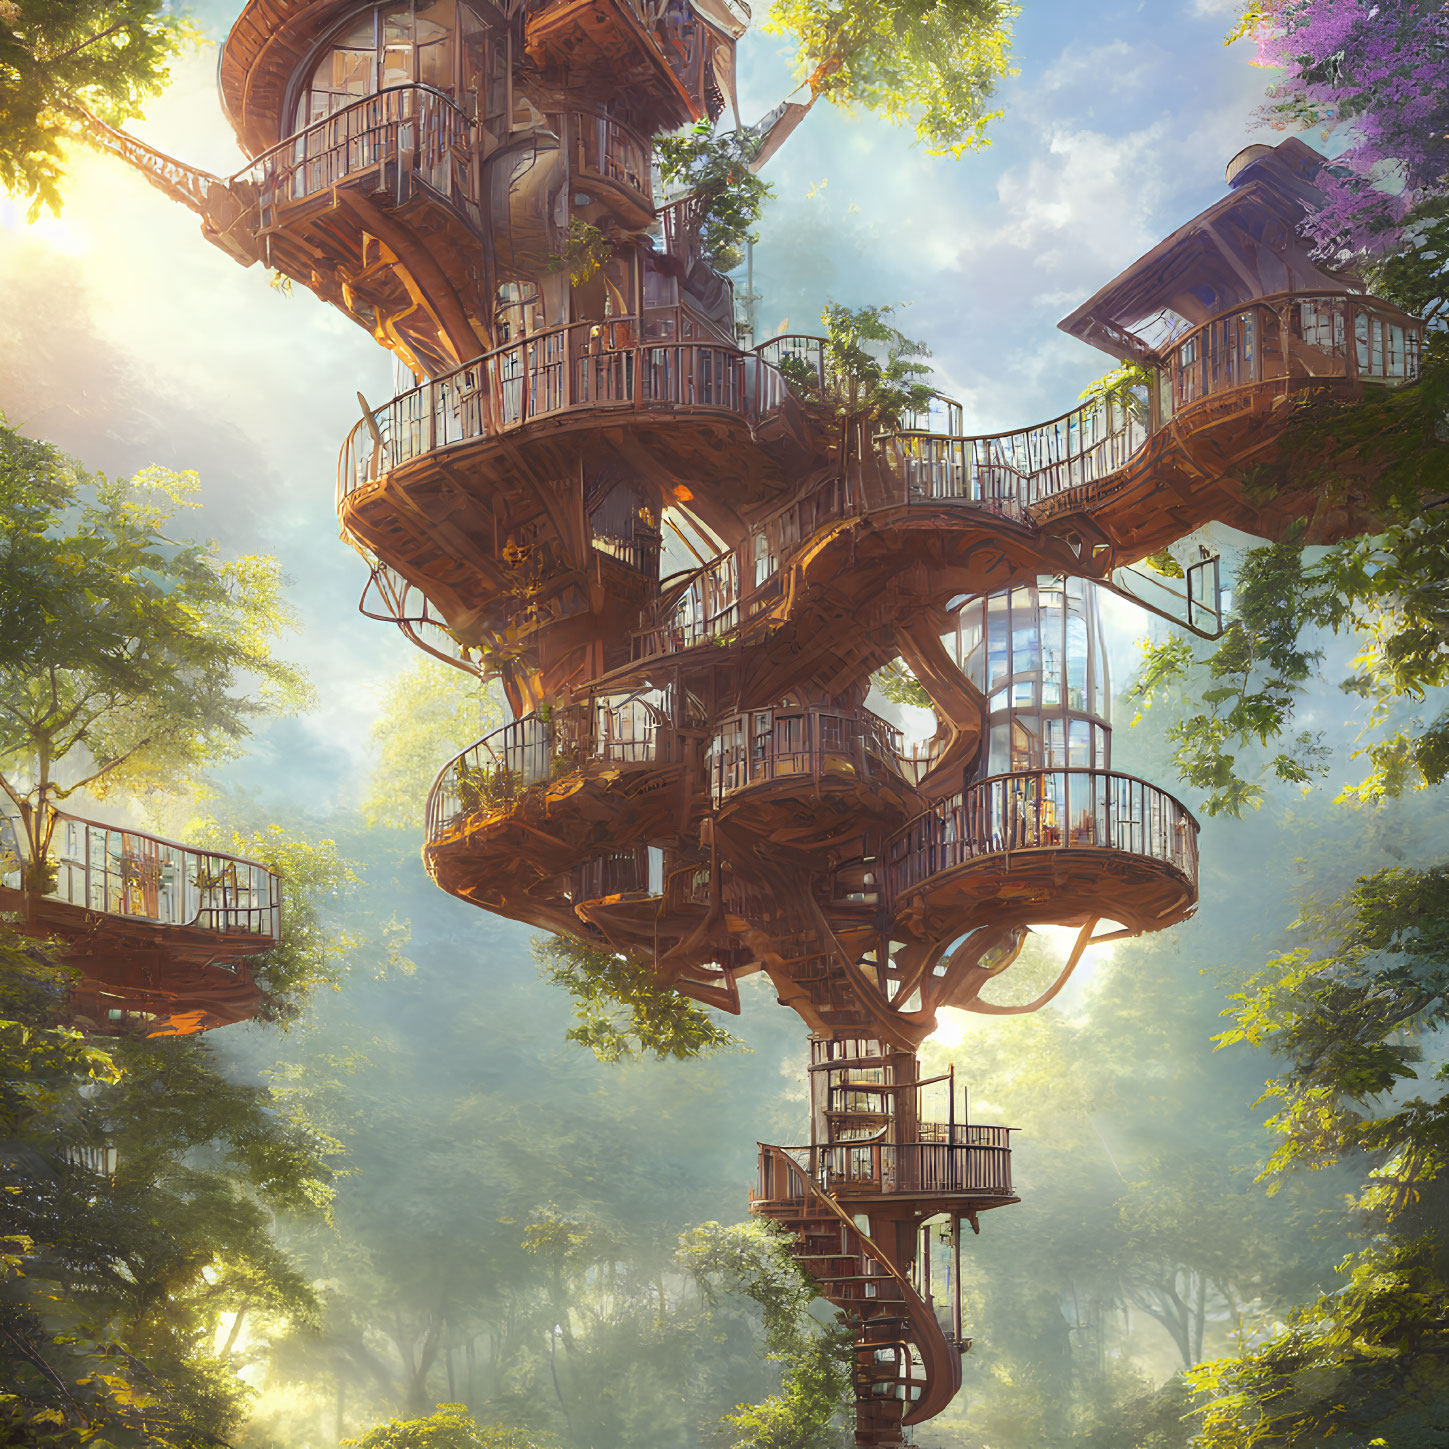 Multi-level treehouse surrounded by lush foliage and sunlight.